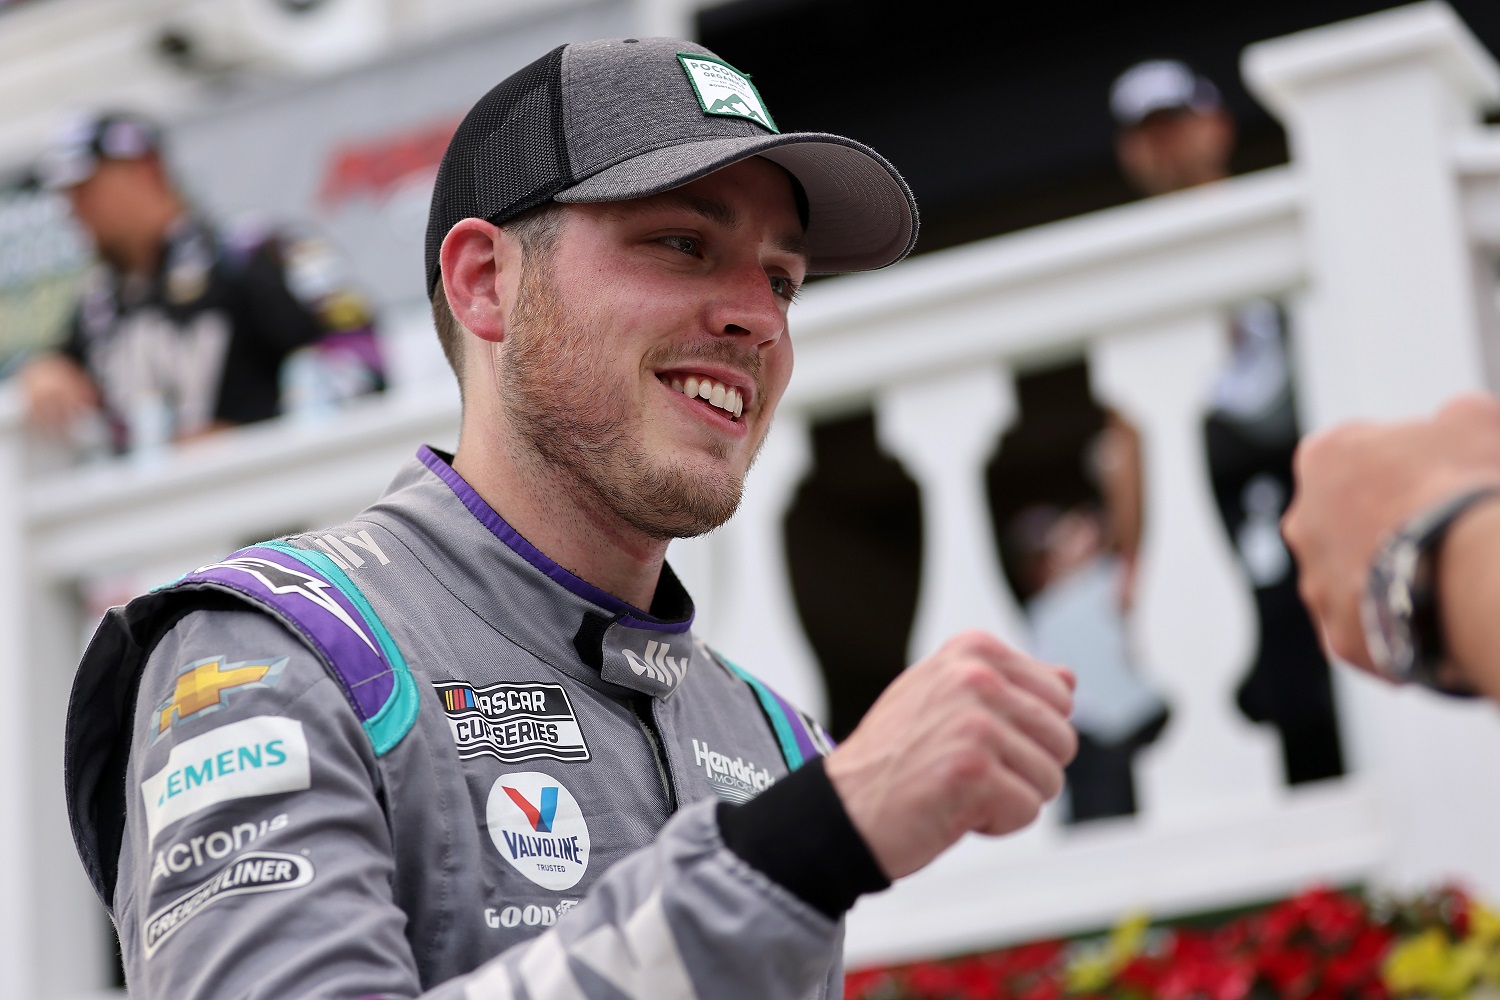 Alex Bowman, driver of the No. 48 Chevrolet, gives a fist bump in victory lane after winning the NASCAR Cup Series Pocono Organics CBD 325 on June 26, 2021.